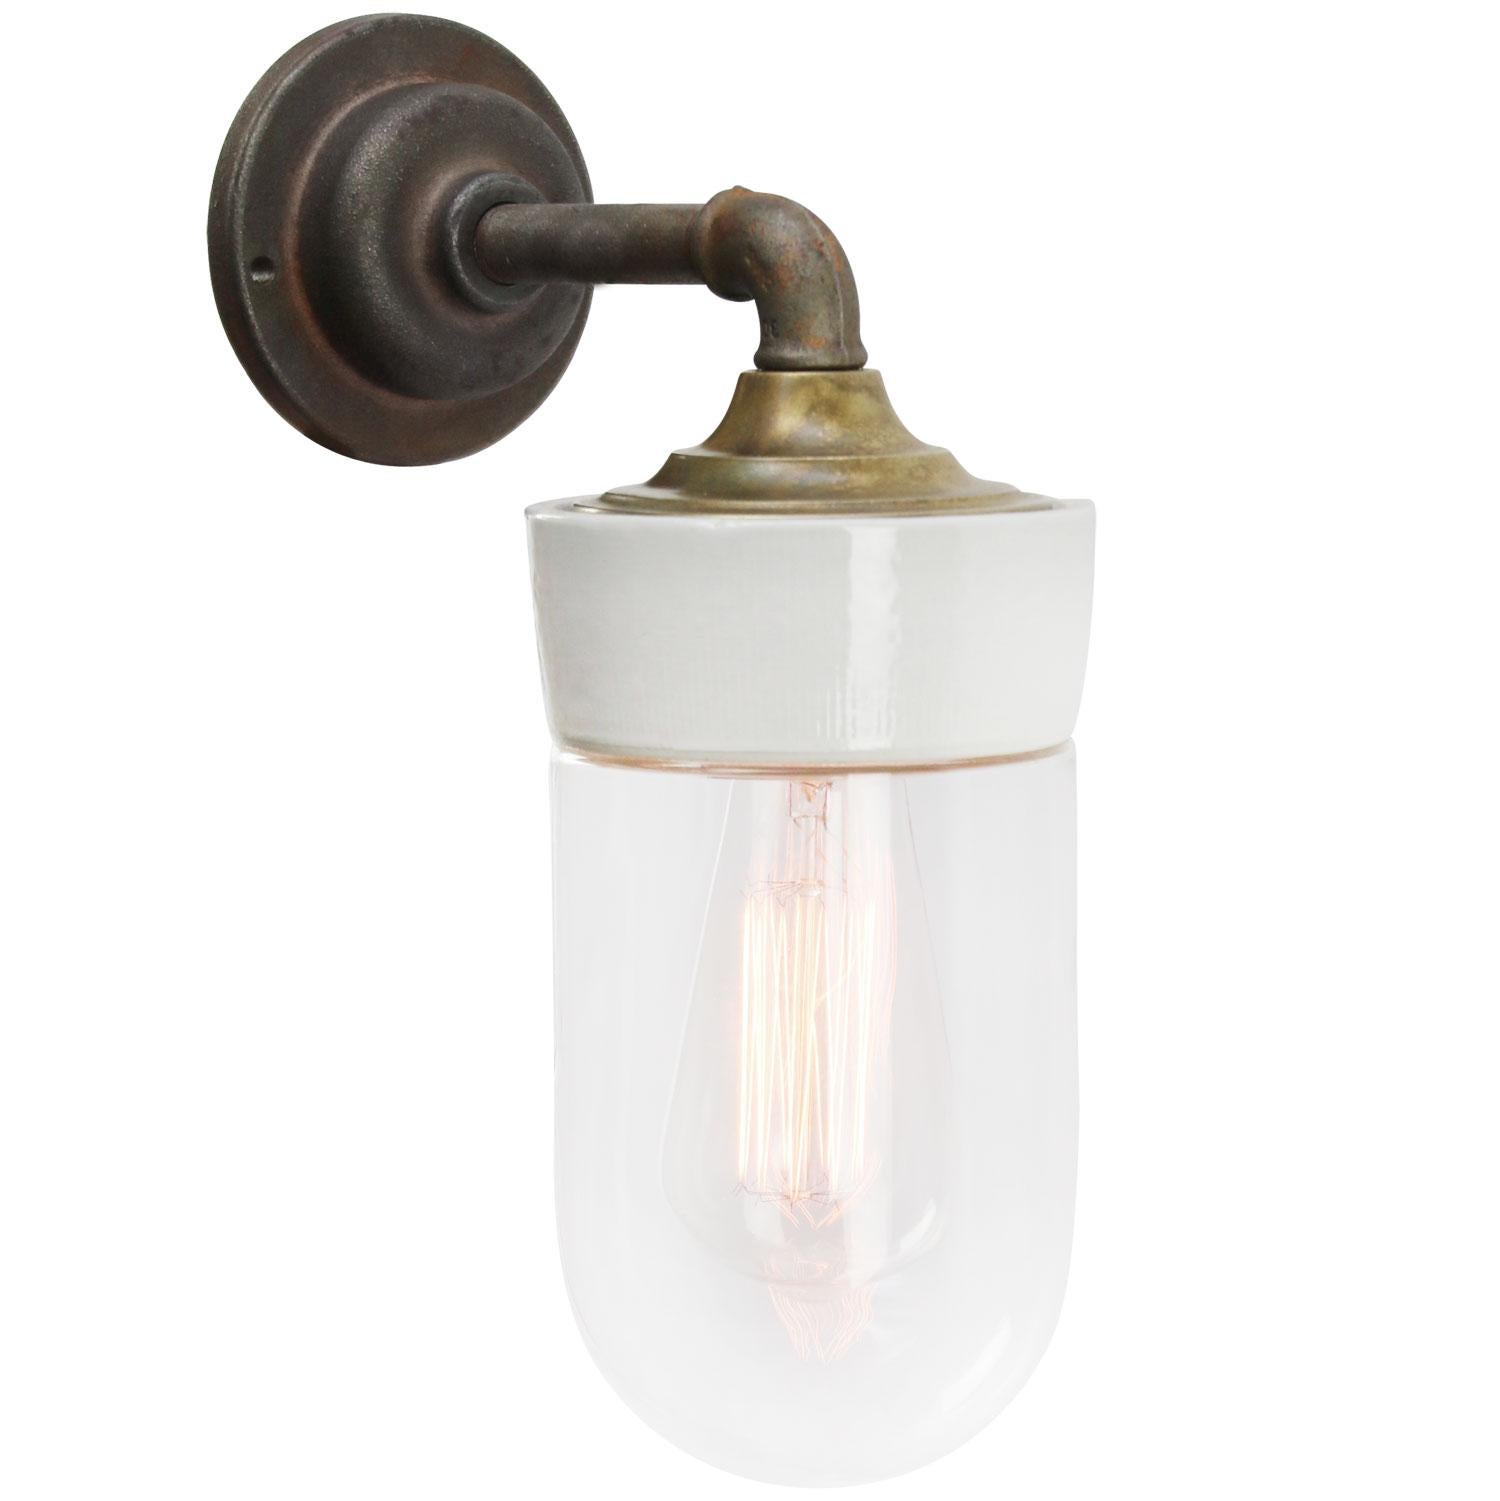 Porcelain Industrial wall lamp.
White porcelain, brass and cast iron
Clear glass.
2 conductors, no ground.

Diameter cast iron wall piece 10 cm. 2 holes to secure.

Weight: 2.25 kg / 5 lb

Priced per individual item. All lamps have been